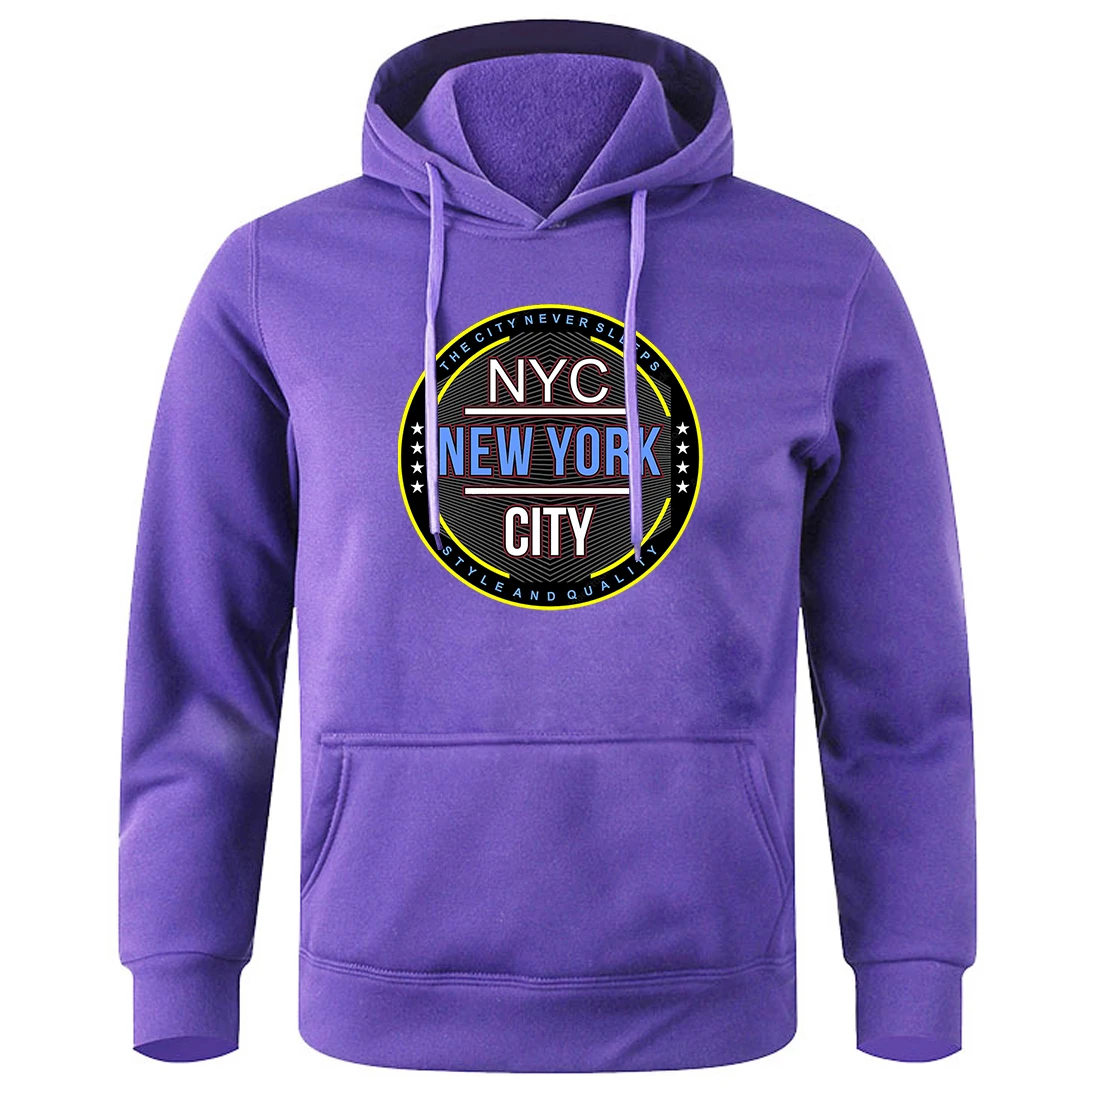 

New York'S Style And Quality Is The City Never Sleep Men Tracksuit Fleece Warm Hooded Fashion Classic Hoodies Loose Basic Hoodie